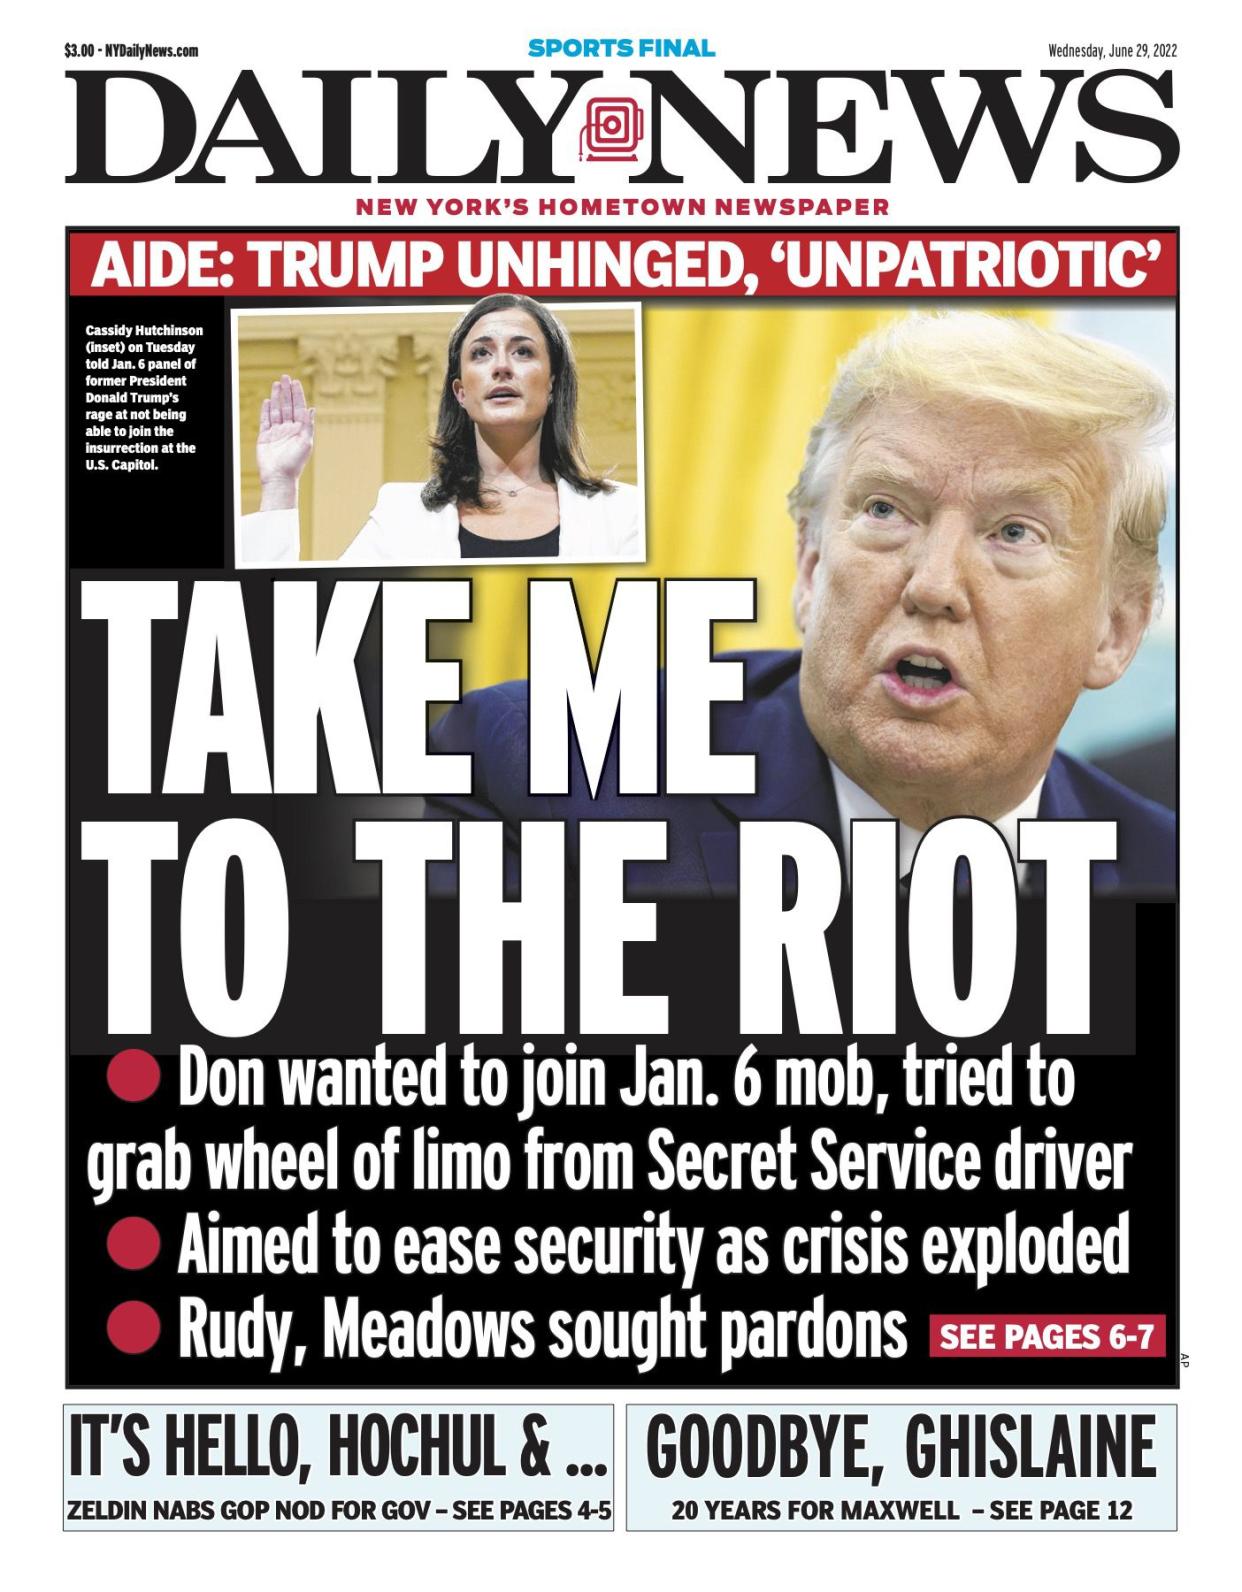 Front page for June 29, 2022: Aide: Trump unhinged, "unpatriotic." Don wanted to join Jan. 6 mob, tried to grab wheel of limo from Secret Service driver. Aimed to ease security as crisis exploded. Rudy, Meadows sought pardons. Cassidy Hutchinson (inset) on Tuesday told Jan. 6 panel of former President Donald Trump's rage at not being able to join the insurrection at the U.S. Capitol.